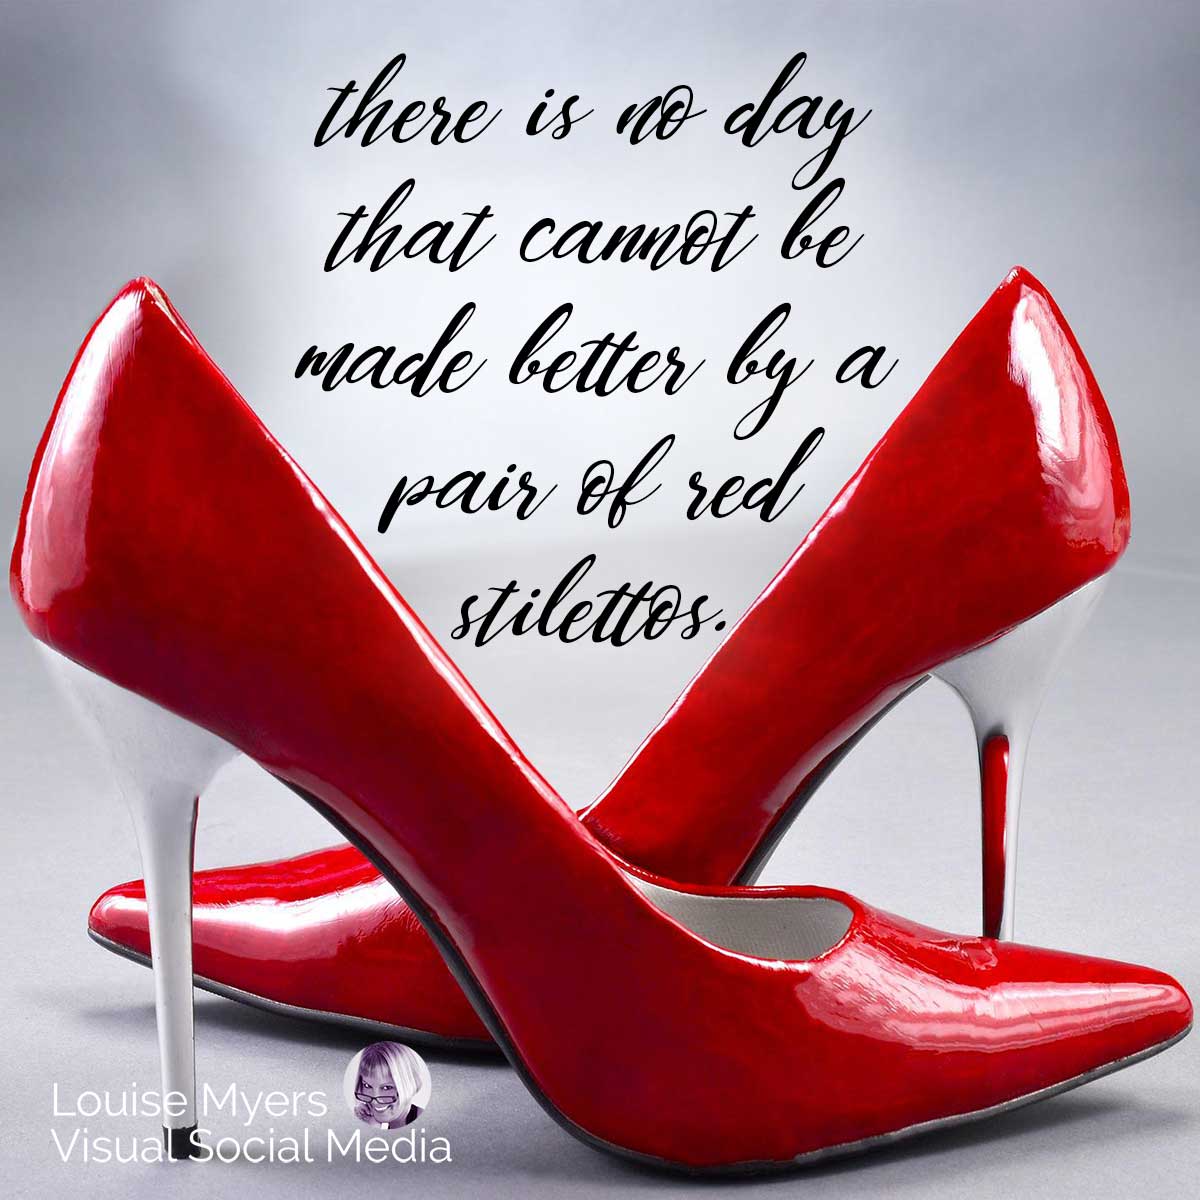 red stilettos with quote about them making any day better.